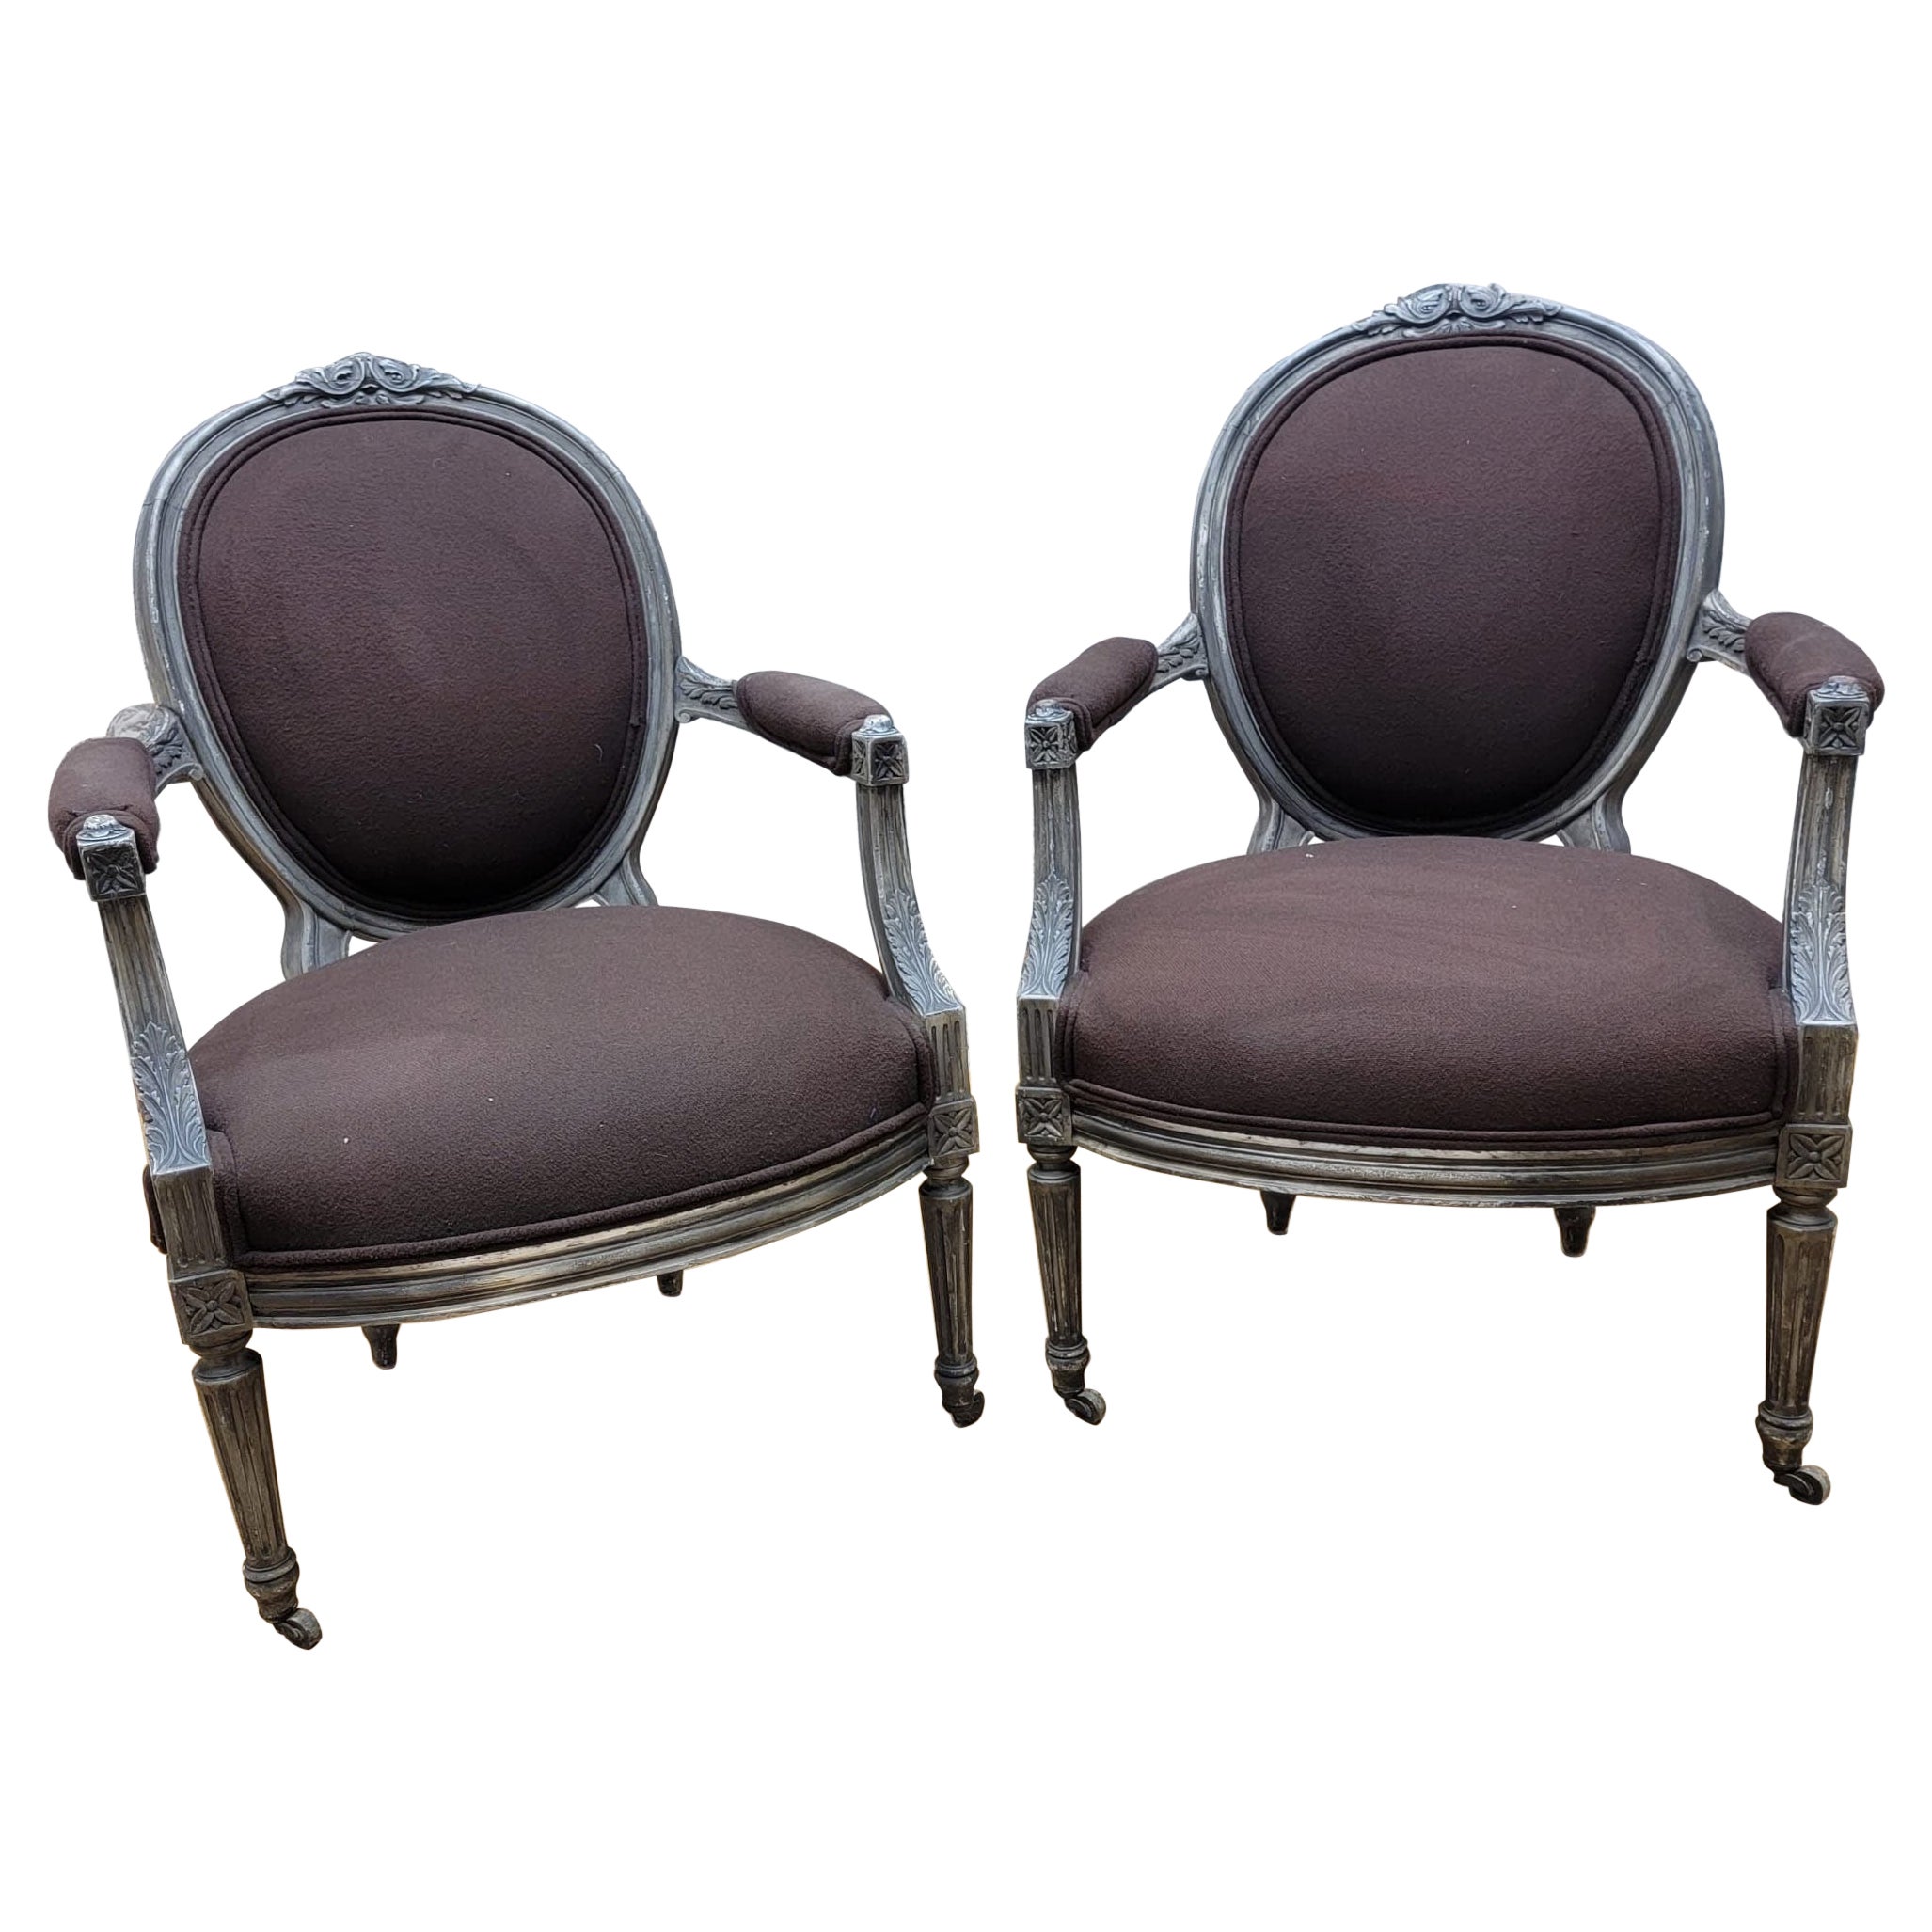 Antique French Louis XVI Hand Carved Silver Gilt Framed Fauteuil Armchairs-Pair For Sale